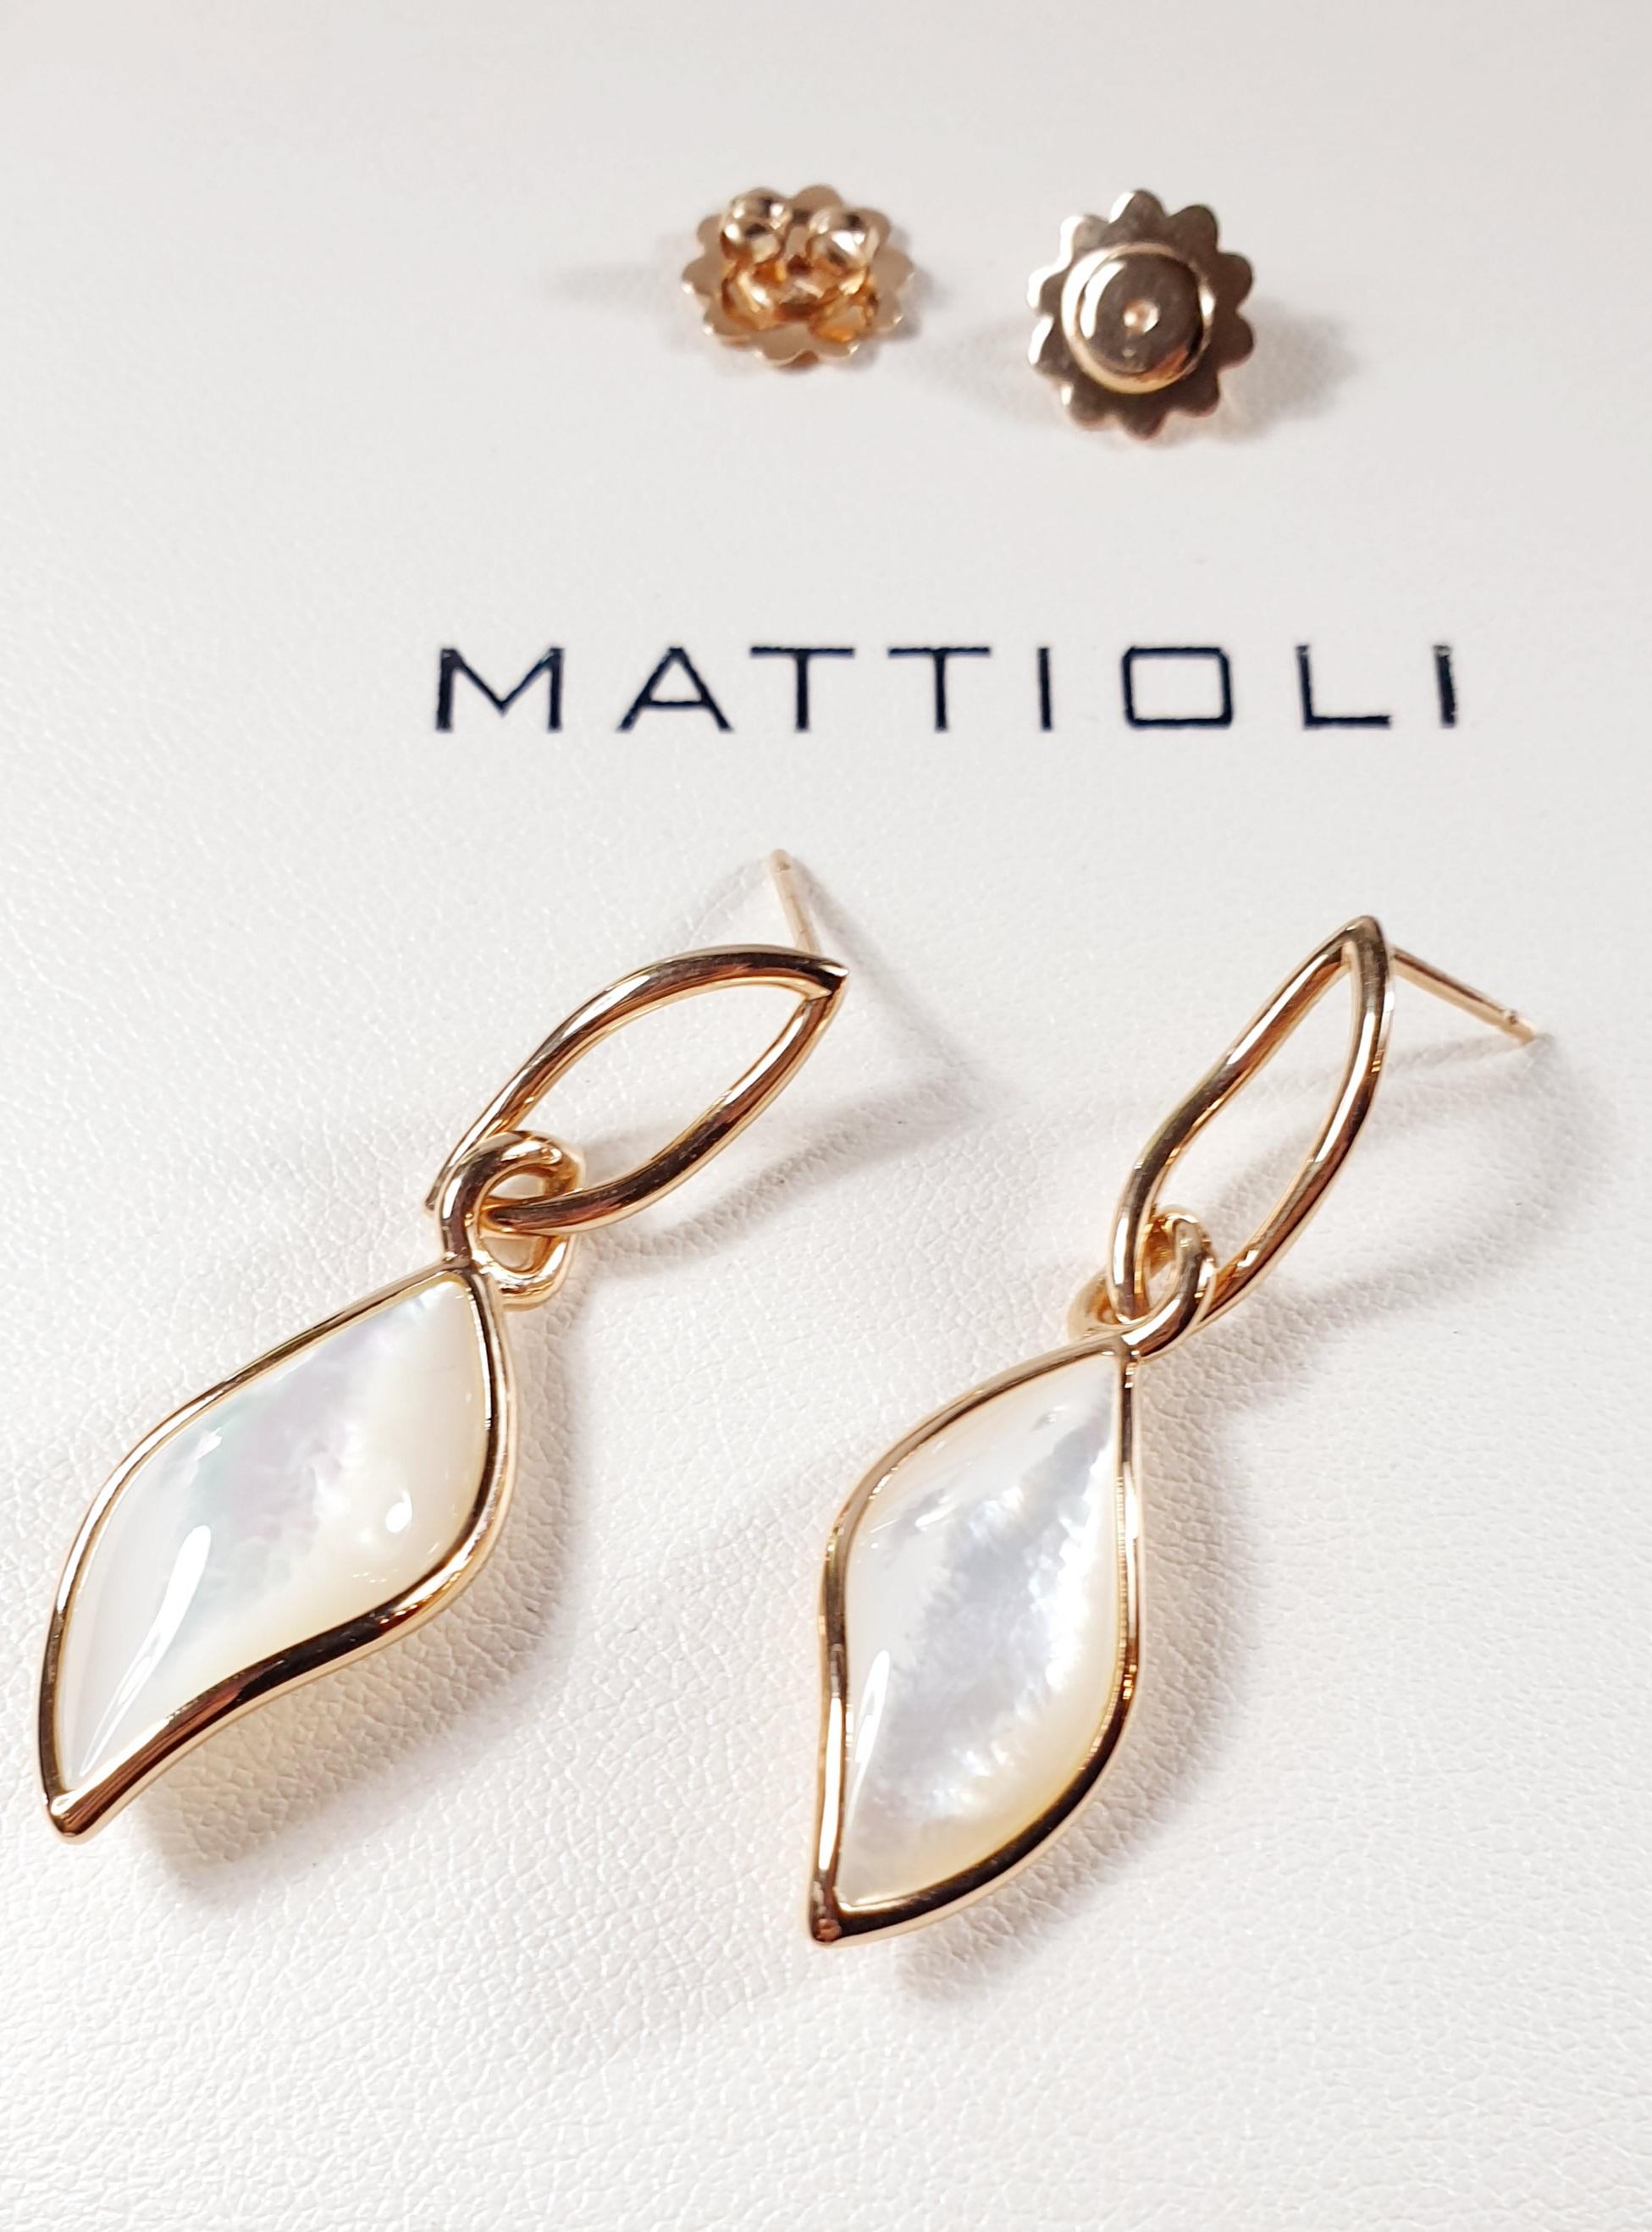 Mattioli Navettes Earrings in 18 K Rose Gold and Mother of Pearl In New Condition For Sale In Bilbao, ES